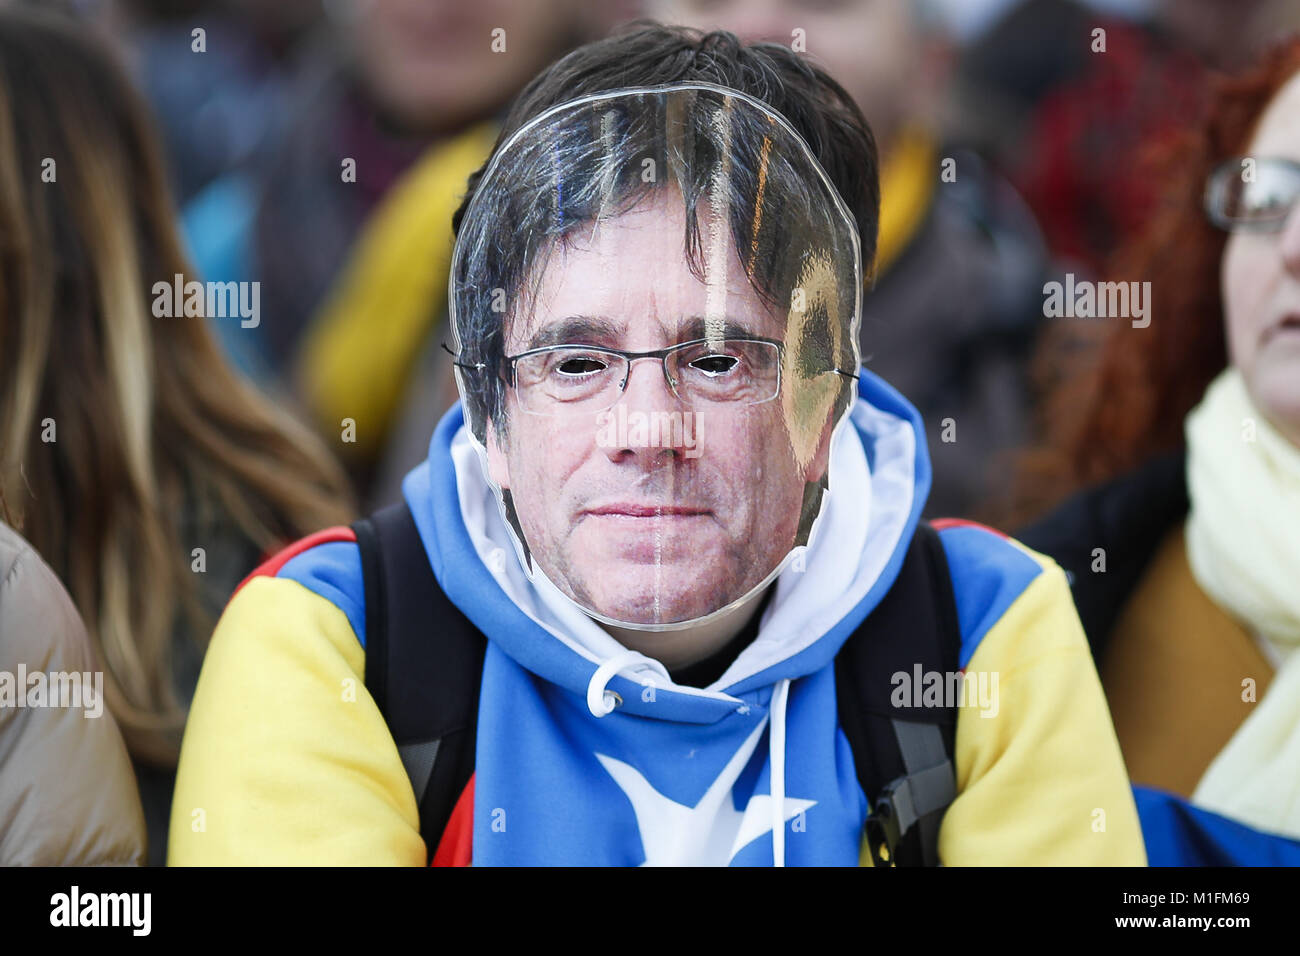 Barcelona, Catalonia, Spain. 30th Jan, 2018. January 30, 2017 - Barcelona, Spain - Catalan Parliament investment; Carles Puigdemont mask in the parliament. Credit: Eric Alonso/ZUMA Wire/Alamy Live News Stock Photo